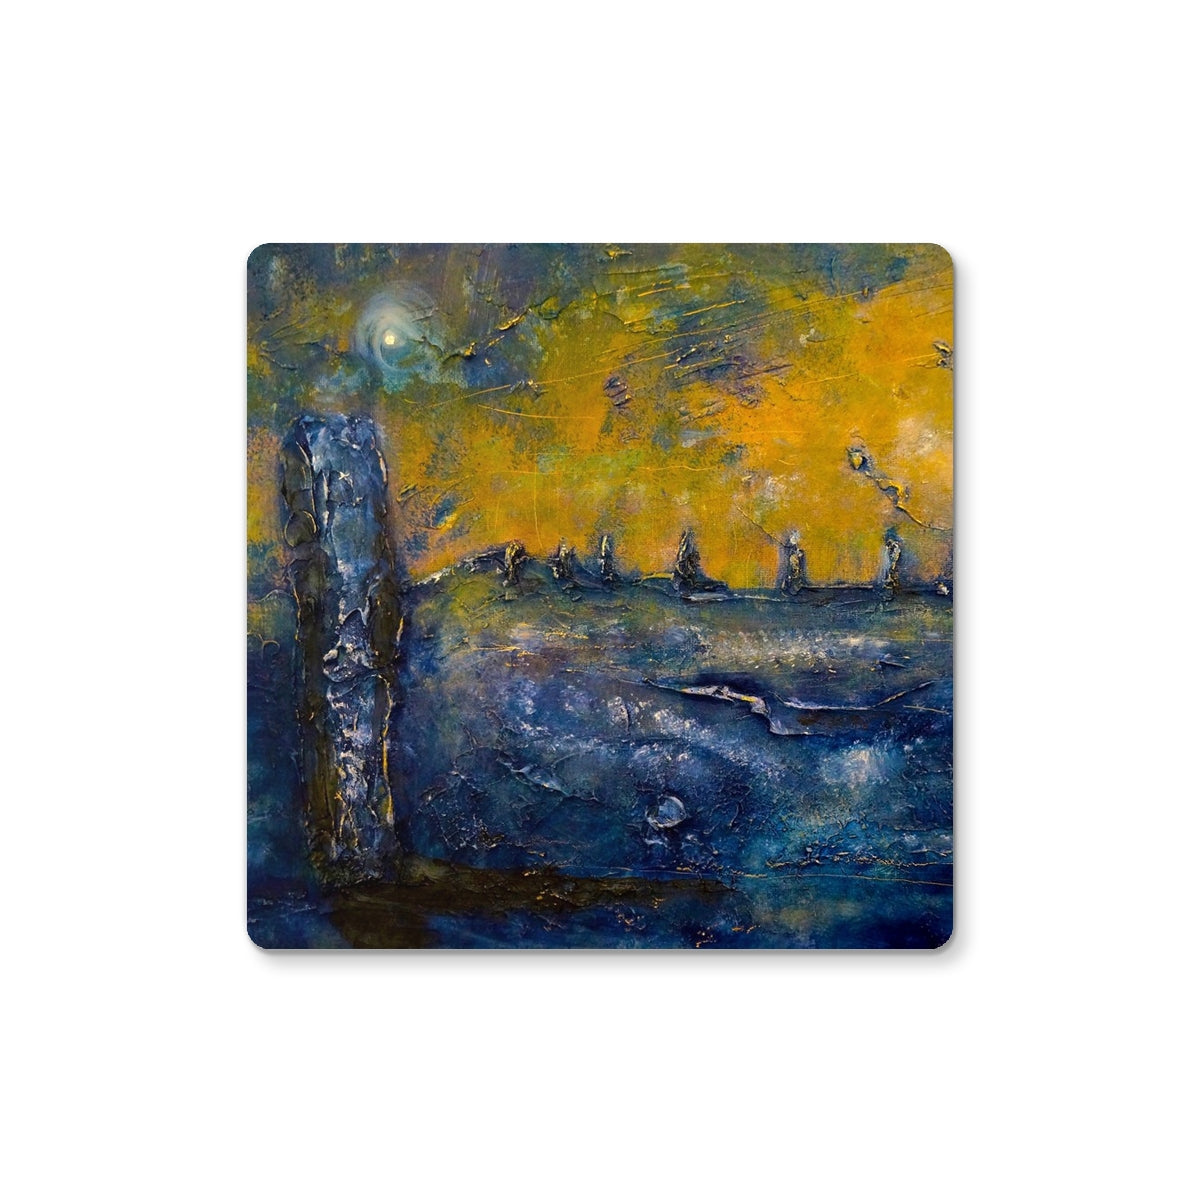 Brodgar Moonlight Orkney Art Gifts Coaster-Coasters-Orkney Art Gallery-Single Coaster-Paintings, Prints, Homeware, Art Gifts From Scotland By Scottish Artist Kevin Hunter